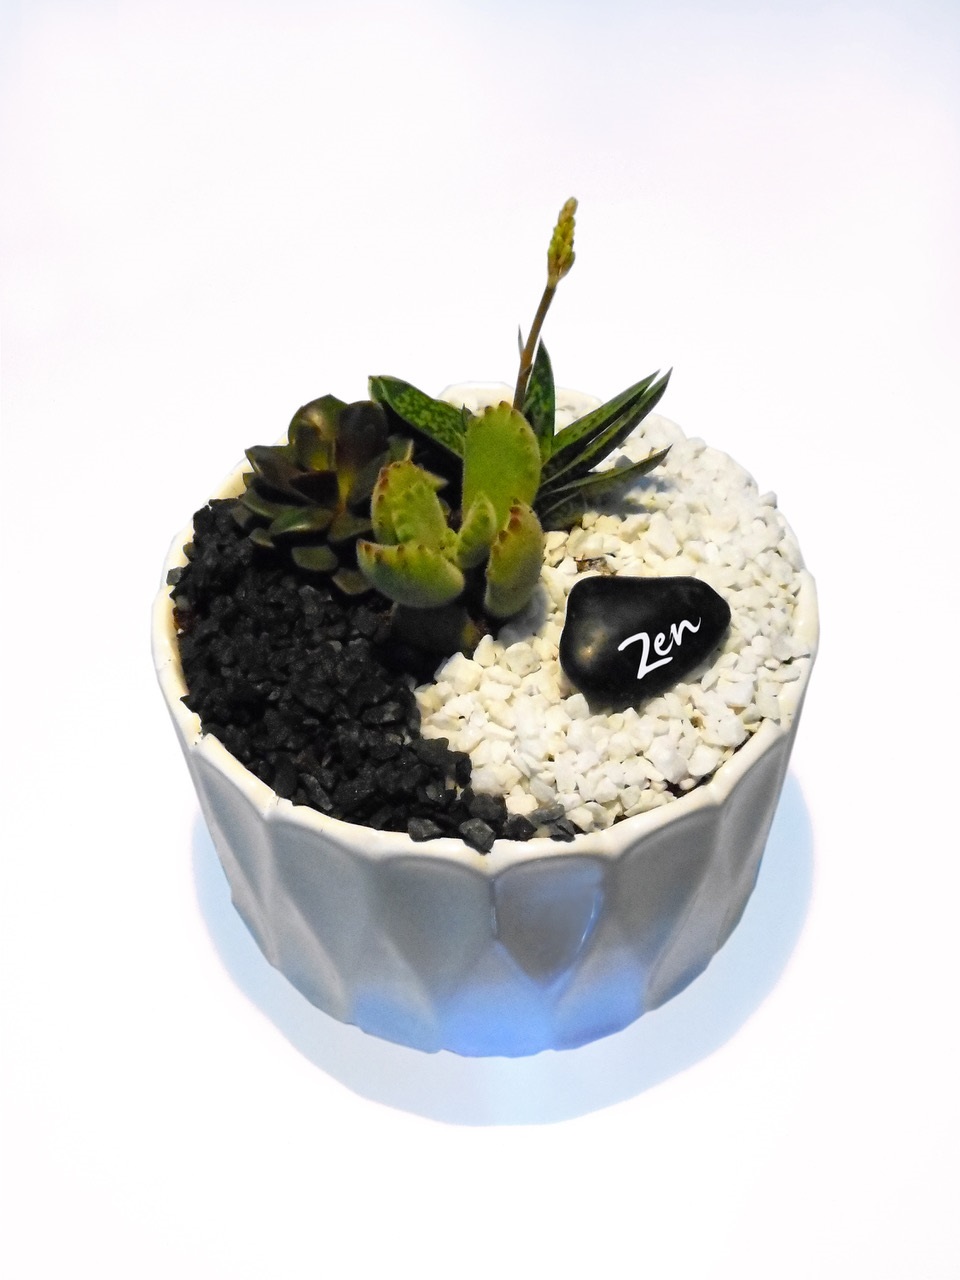 A Zen Garden  White Ceramic Bowl plant nite project by Yaymaker